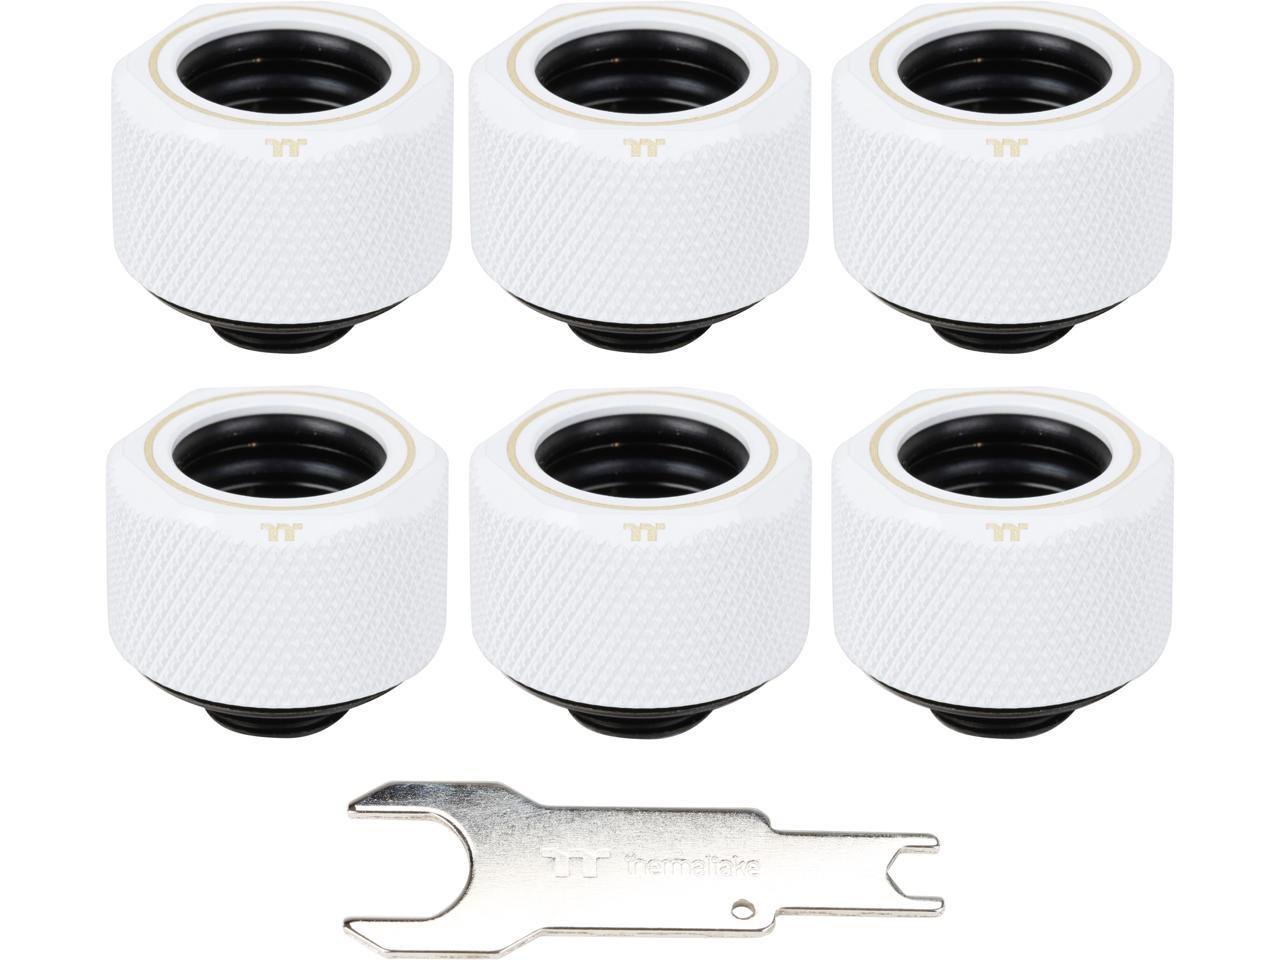 Thermaltake Pacific White 4 Build-in O-Rings C-Pro G1/4 PETG 16mm OD  Compression Fitting 6 Pack CL-W211-CU00WT-B